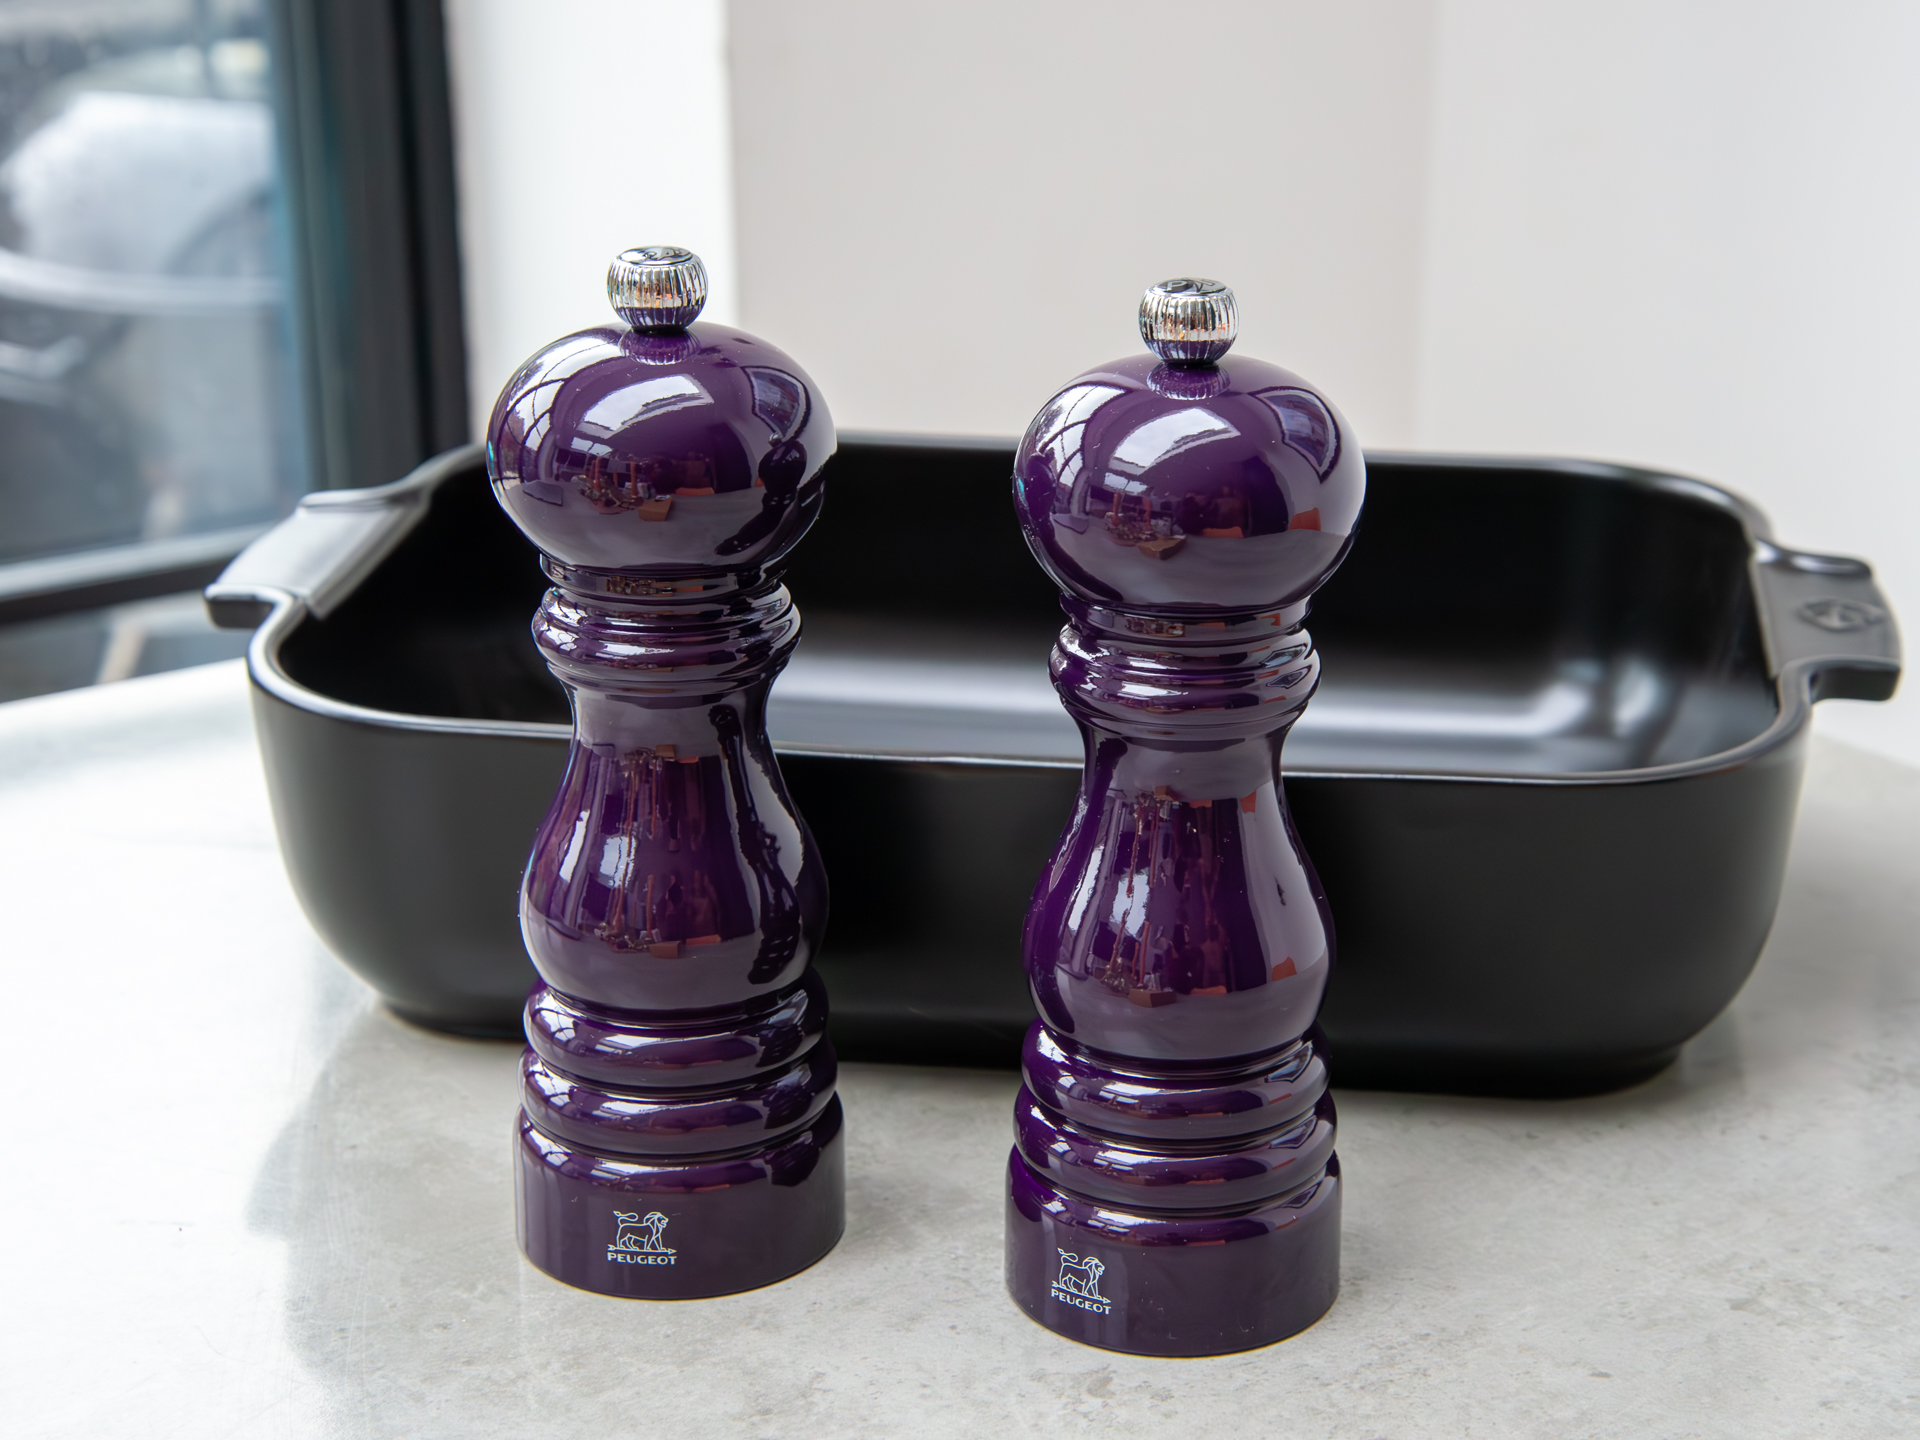 Peugeot purple homeware - salt and pepper mills, and an oven dish